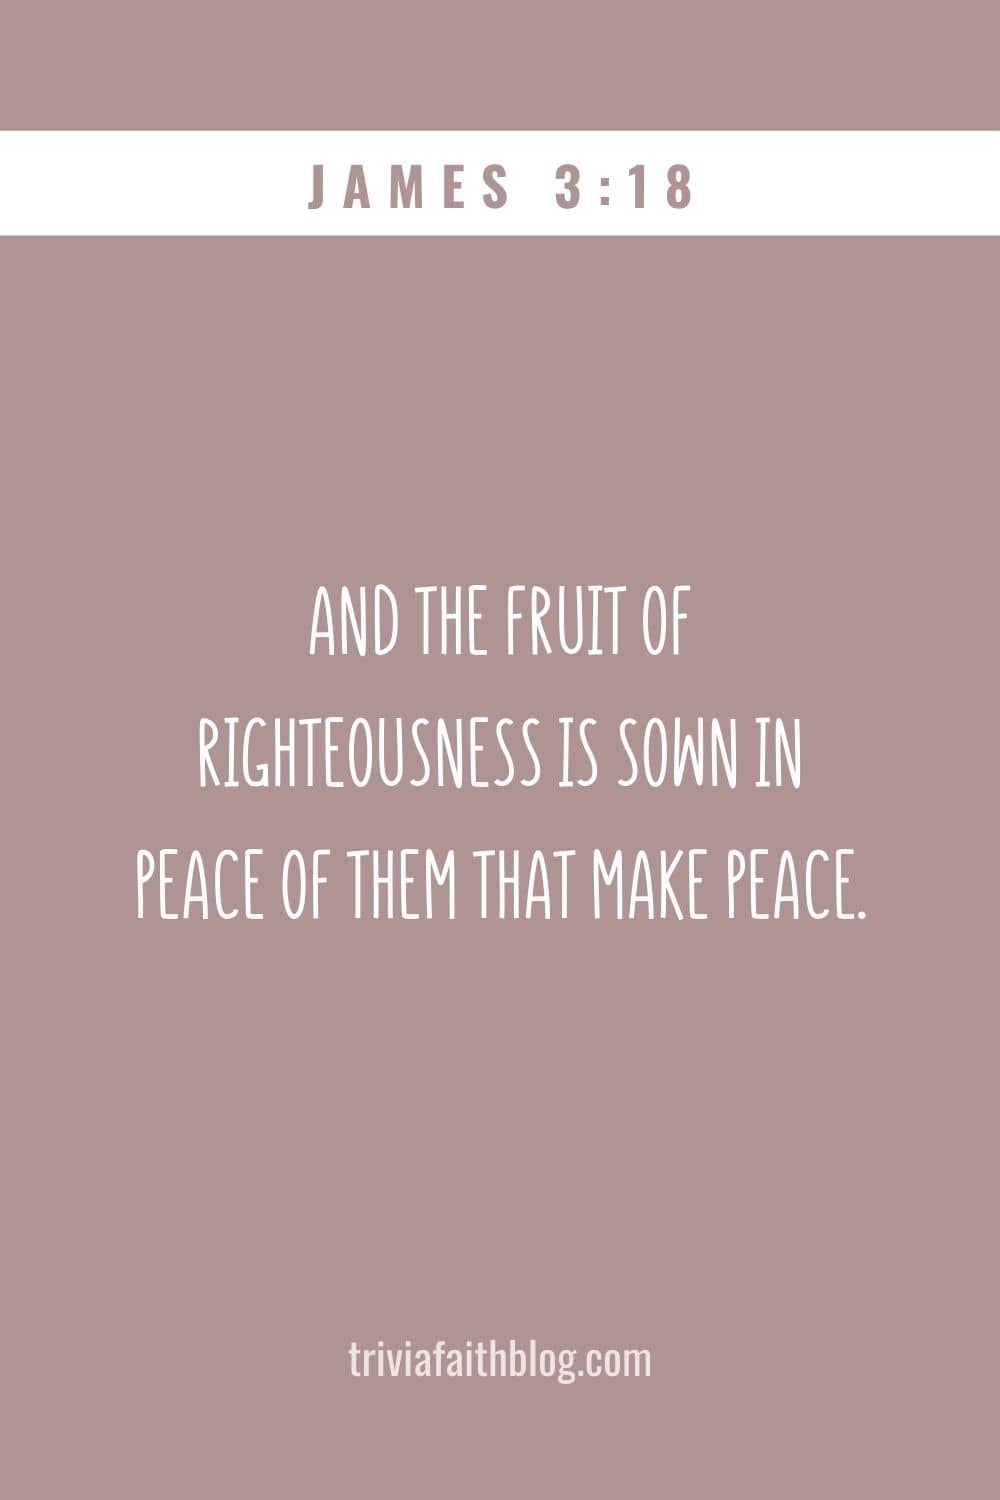 And the fruit of righteousness is sown in peace of them that make peace